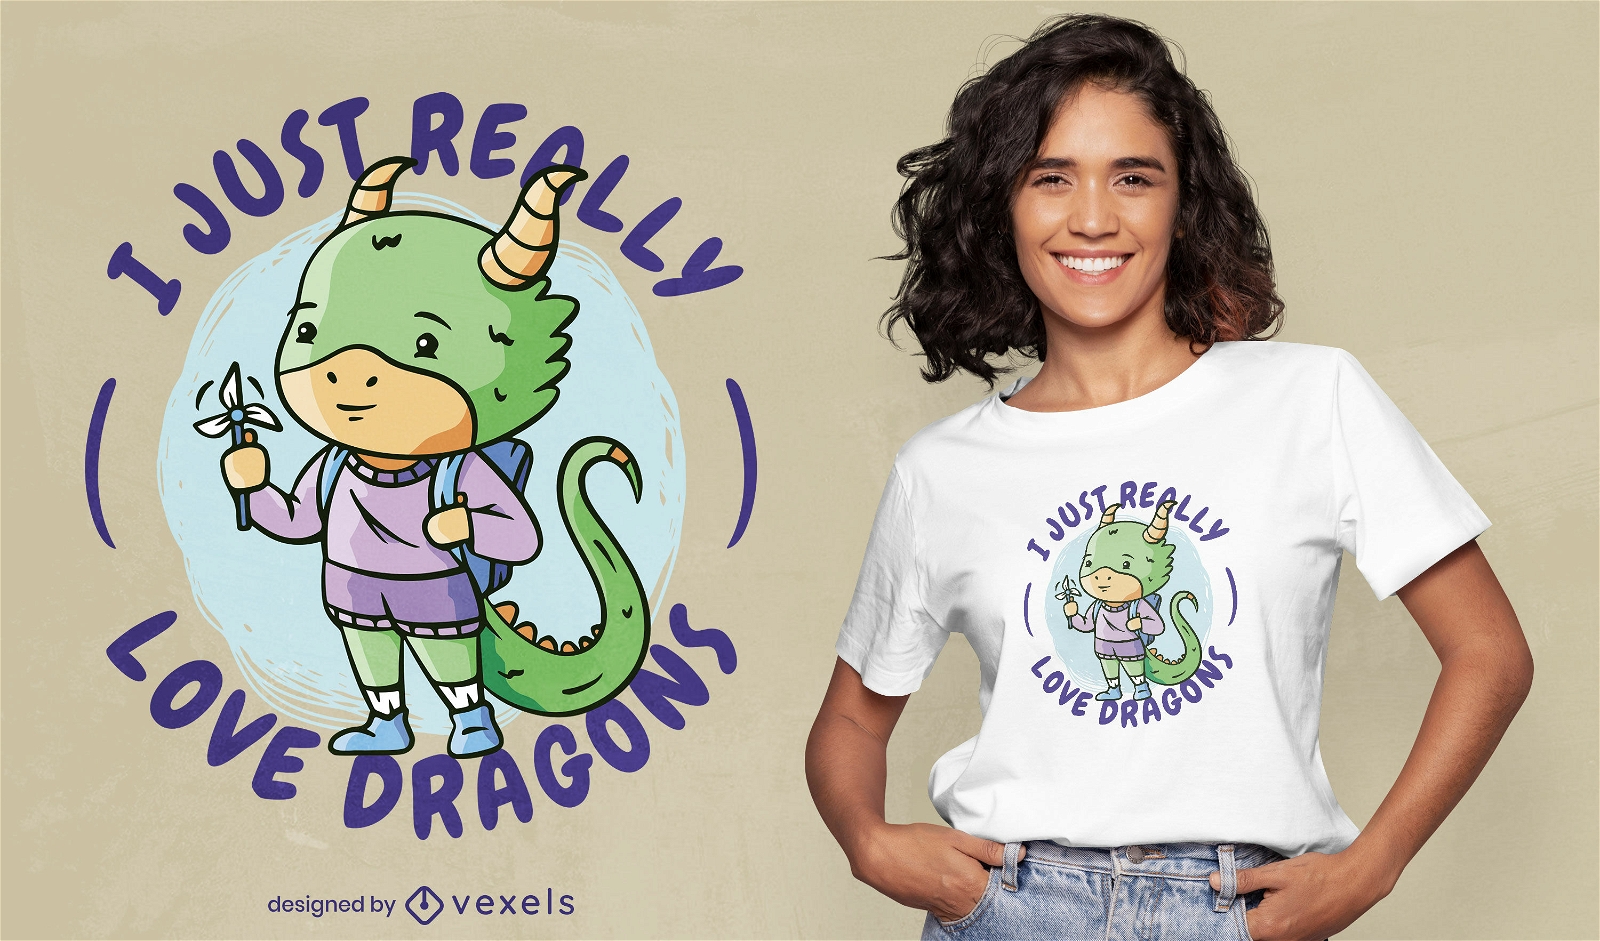 Lovely dragons quote t-shirt design